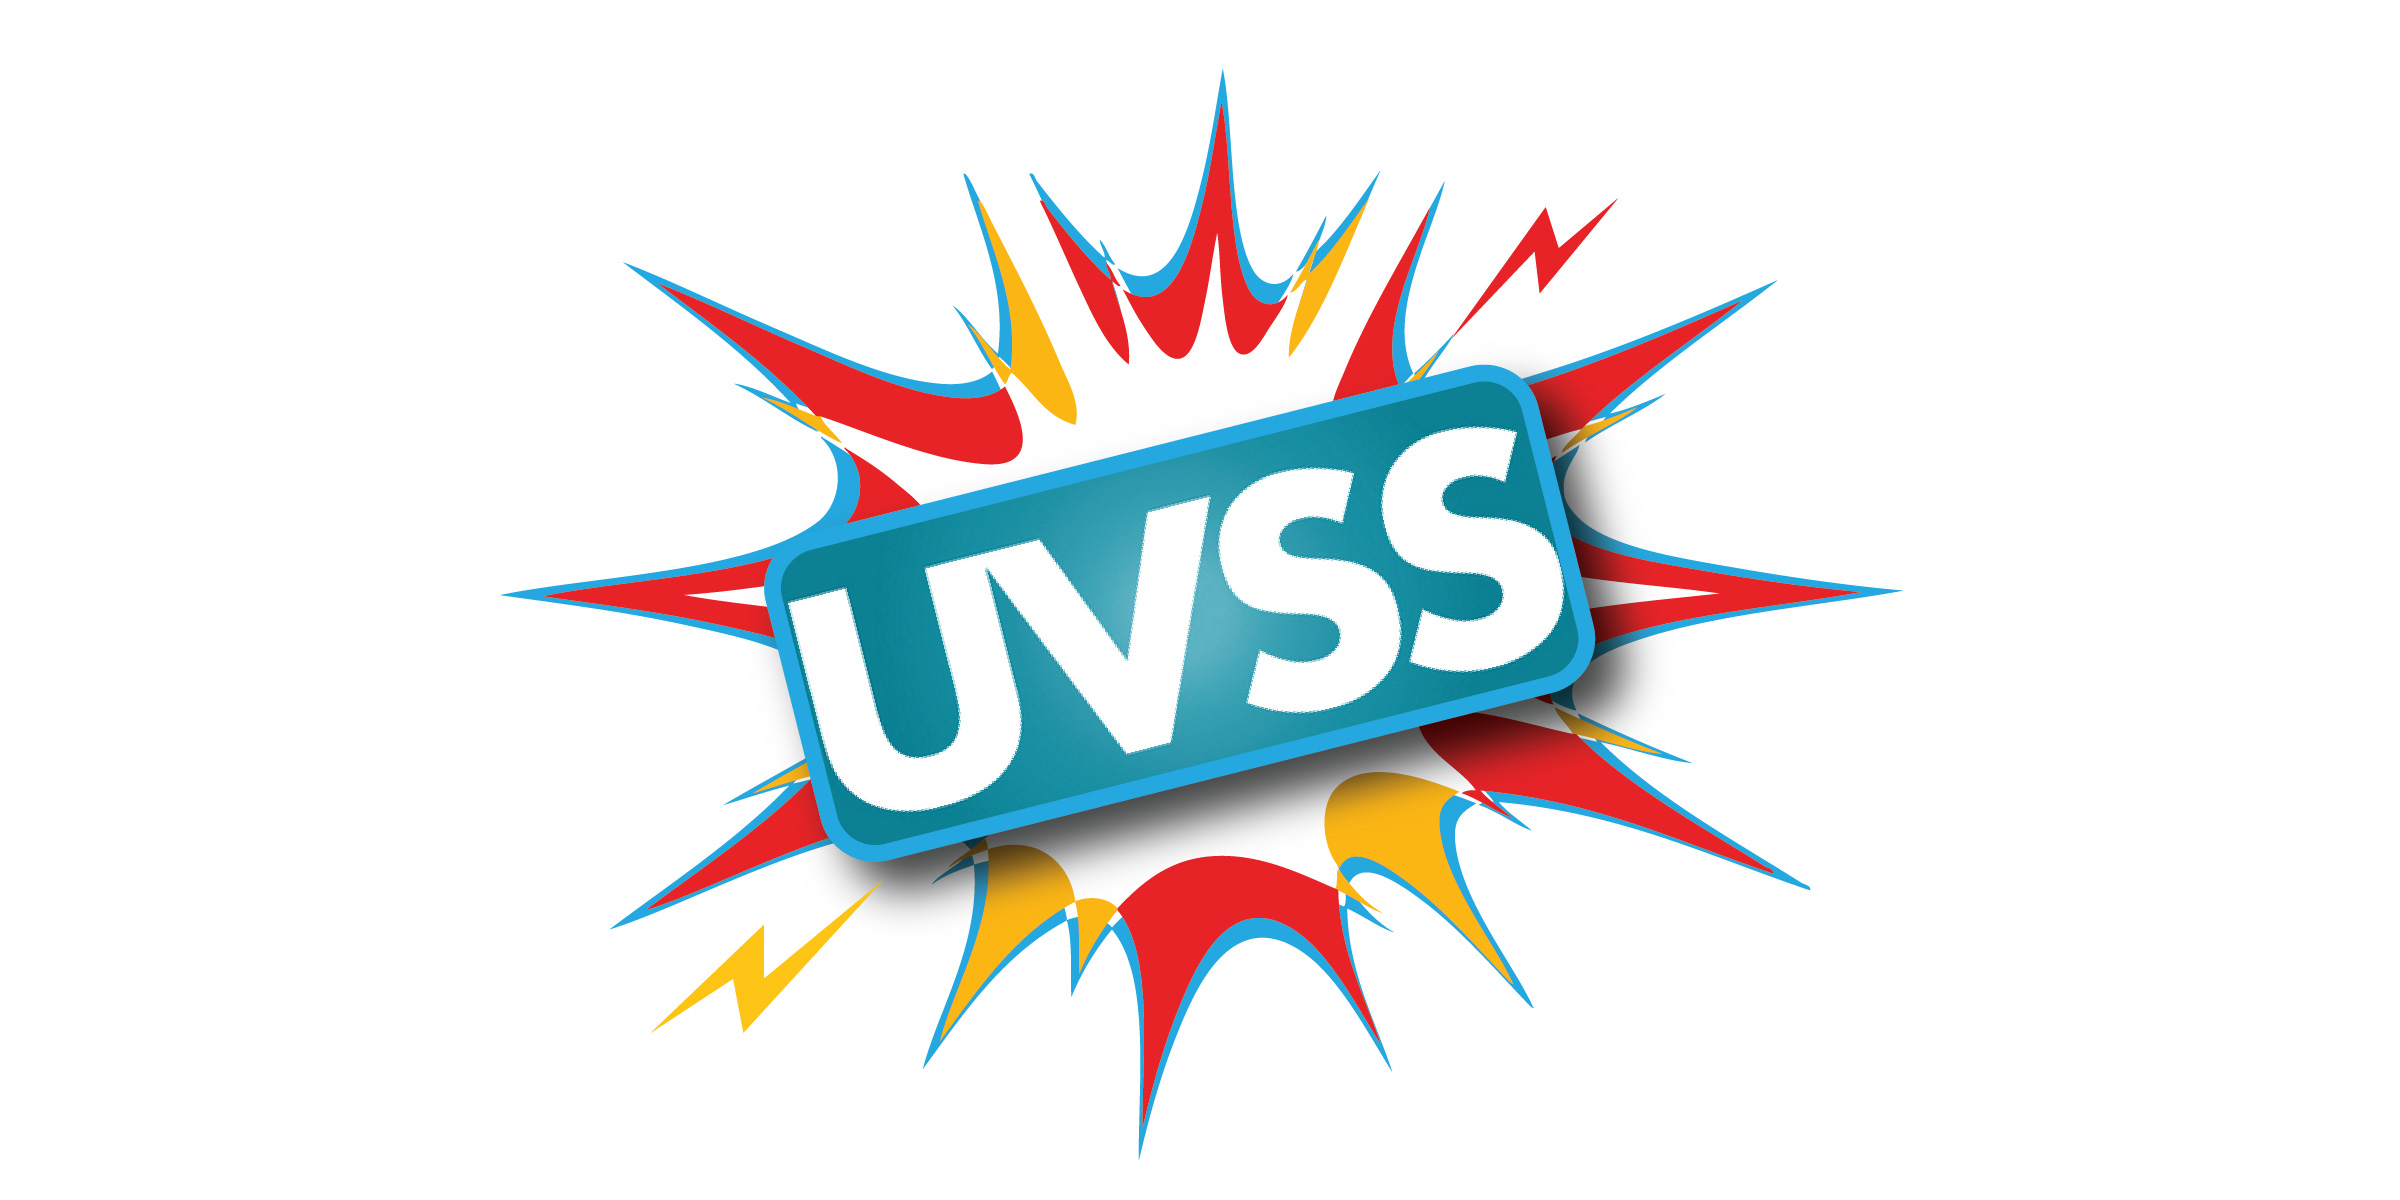 Exclusive: UVSS slates leaked ahead of 2020 election